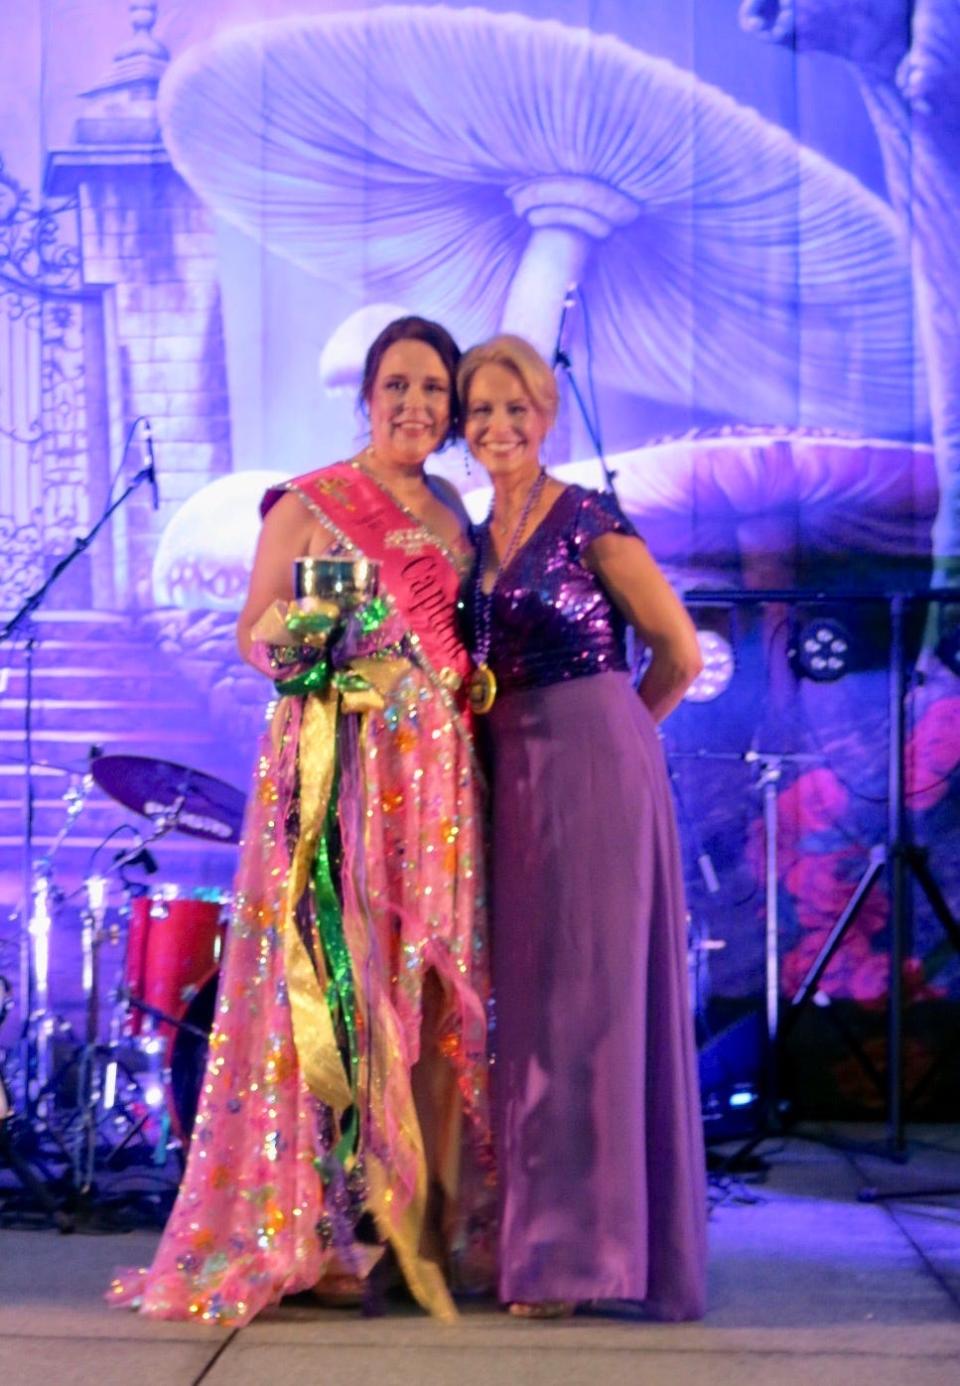 Krewe of Justinian XXX Captain Amy Gardner-Day with outgoing Captain XXIX Nancy Cooper at the krewe's coronation event on August 12, 2023.